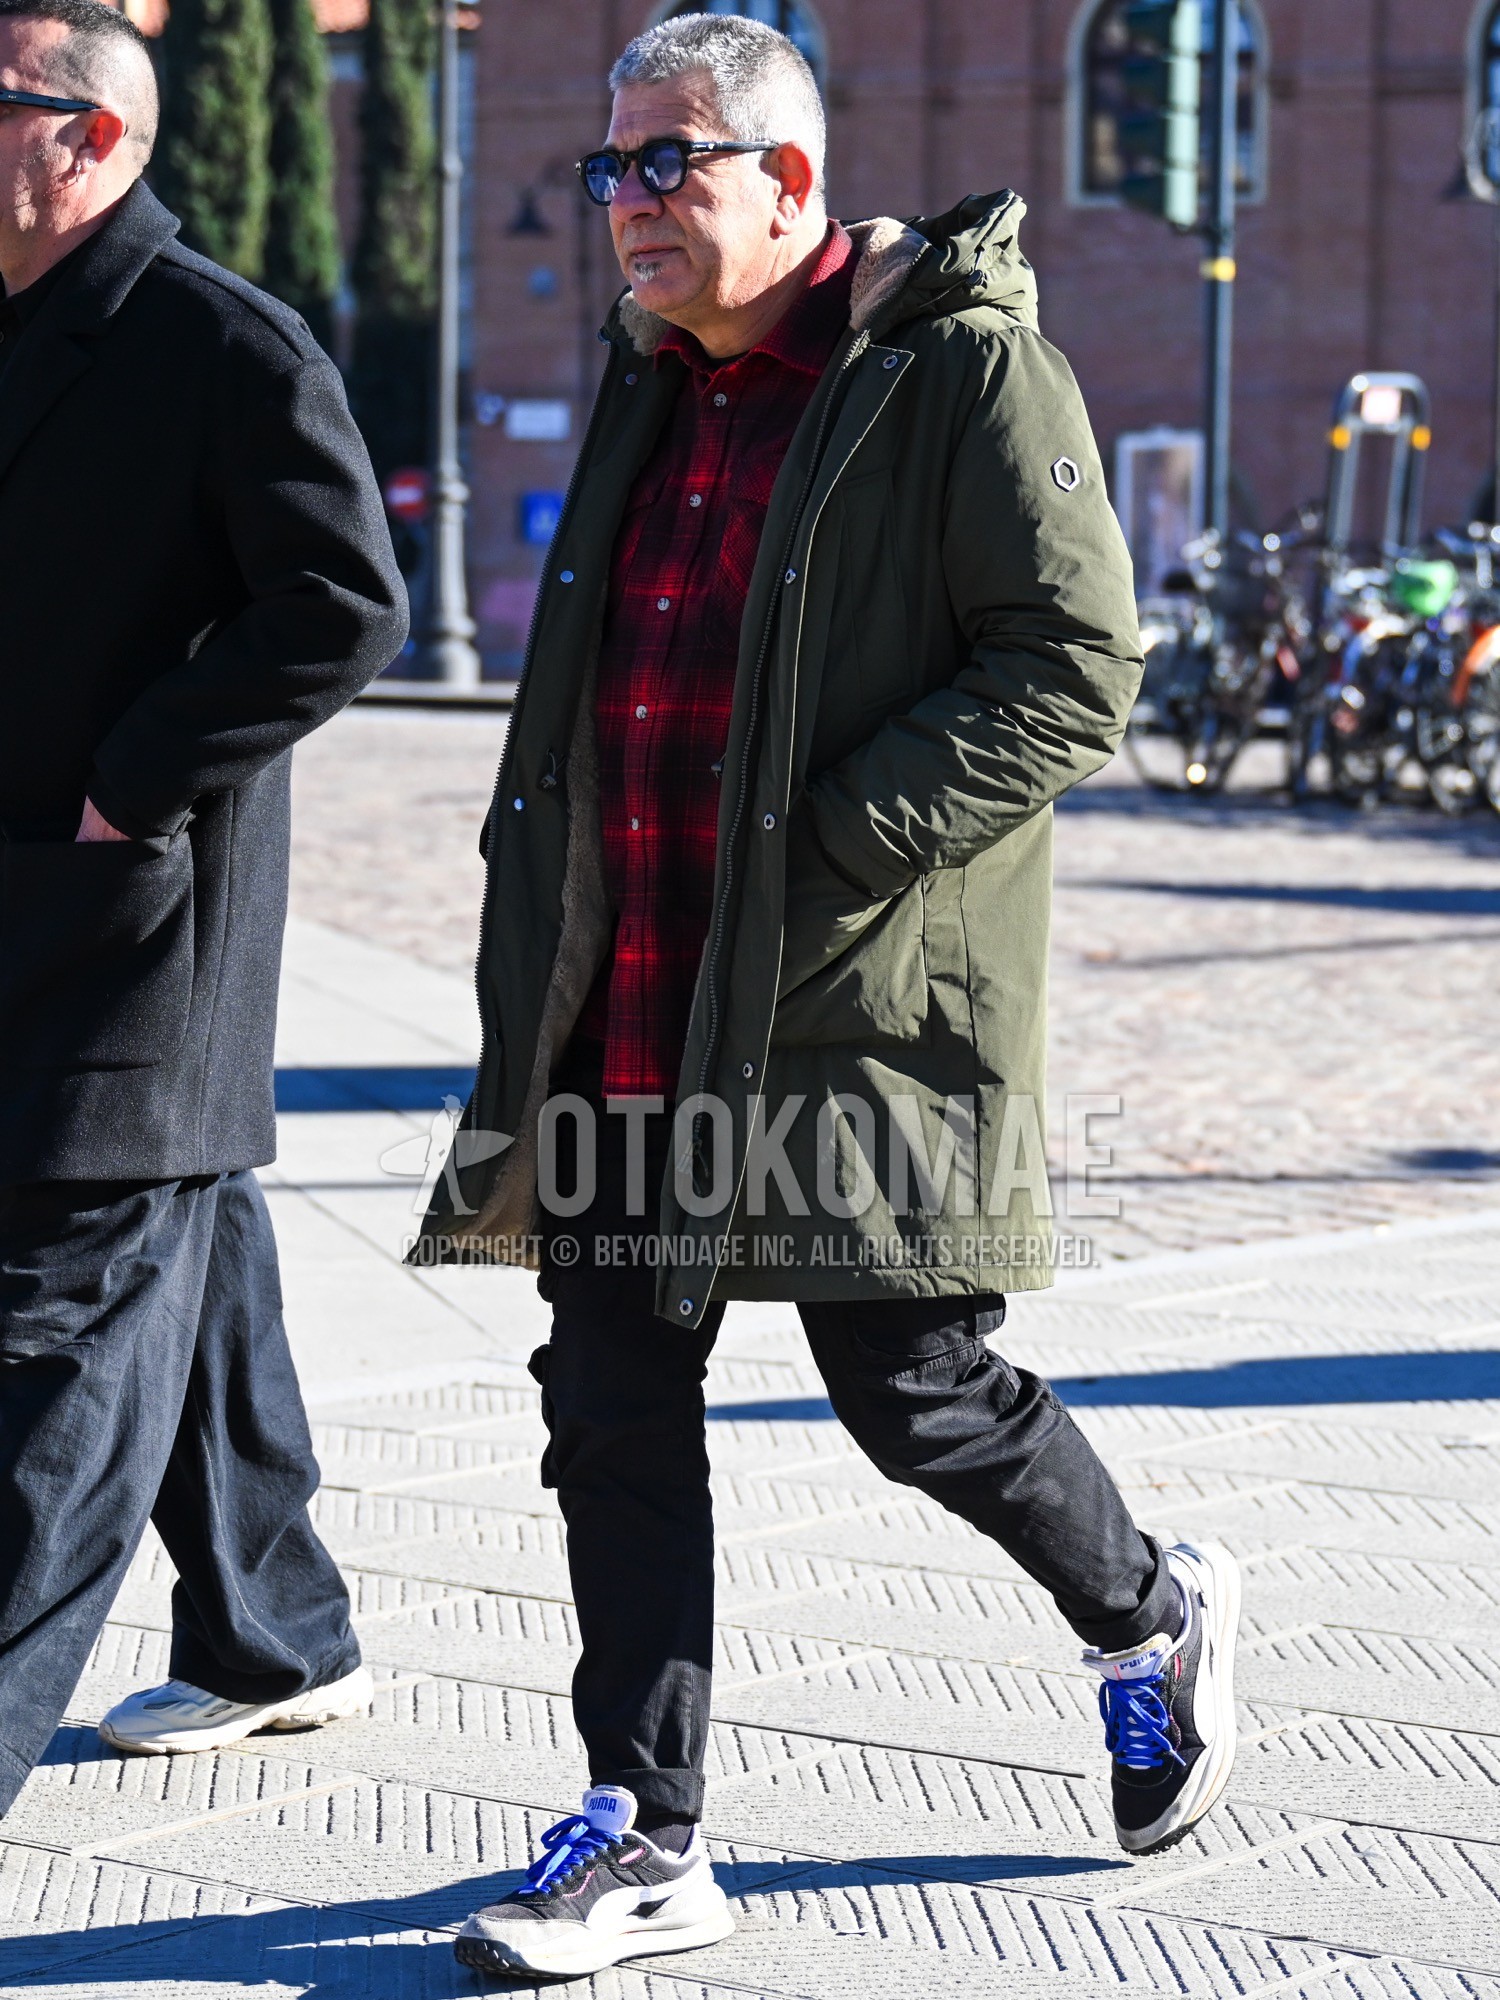 Men's autumn winter outfit with black plain sunglasses, olive green plain mod coat, red check shirt, black plain cargo pants, black plain socks, black white low-cut sneakers.